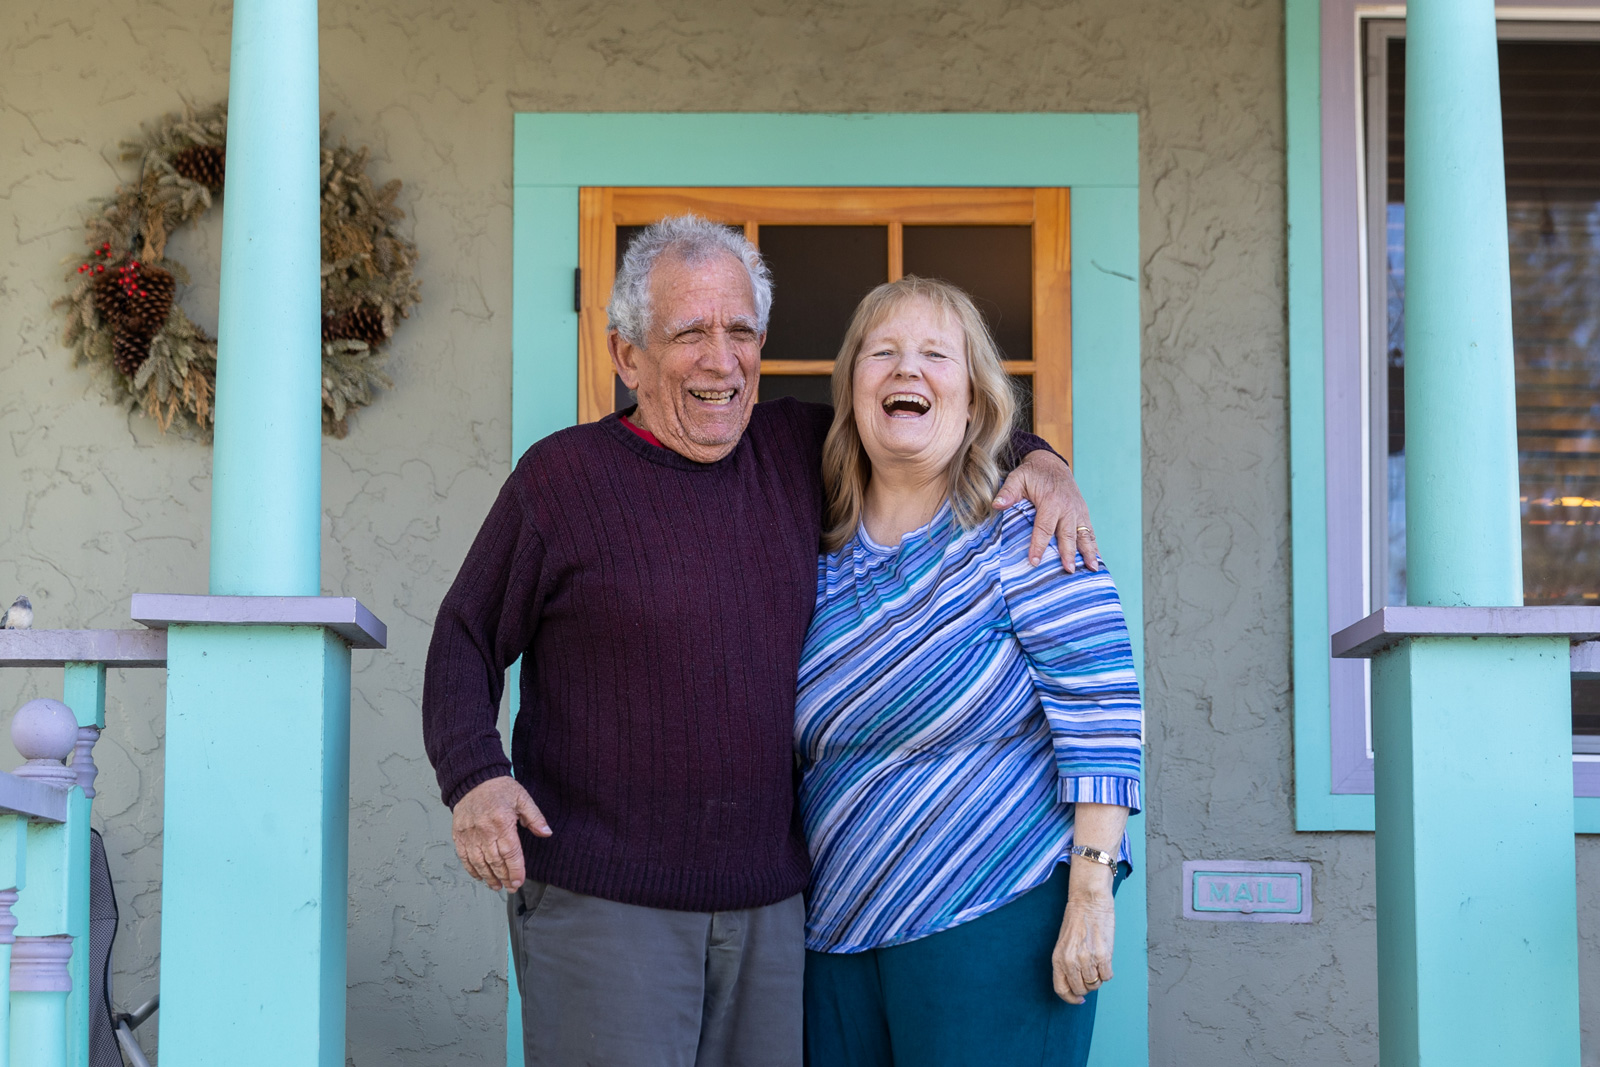 Sam and Betz Miller laugh as they hug one another on the front porch of their Santa Rosa home.